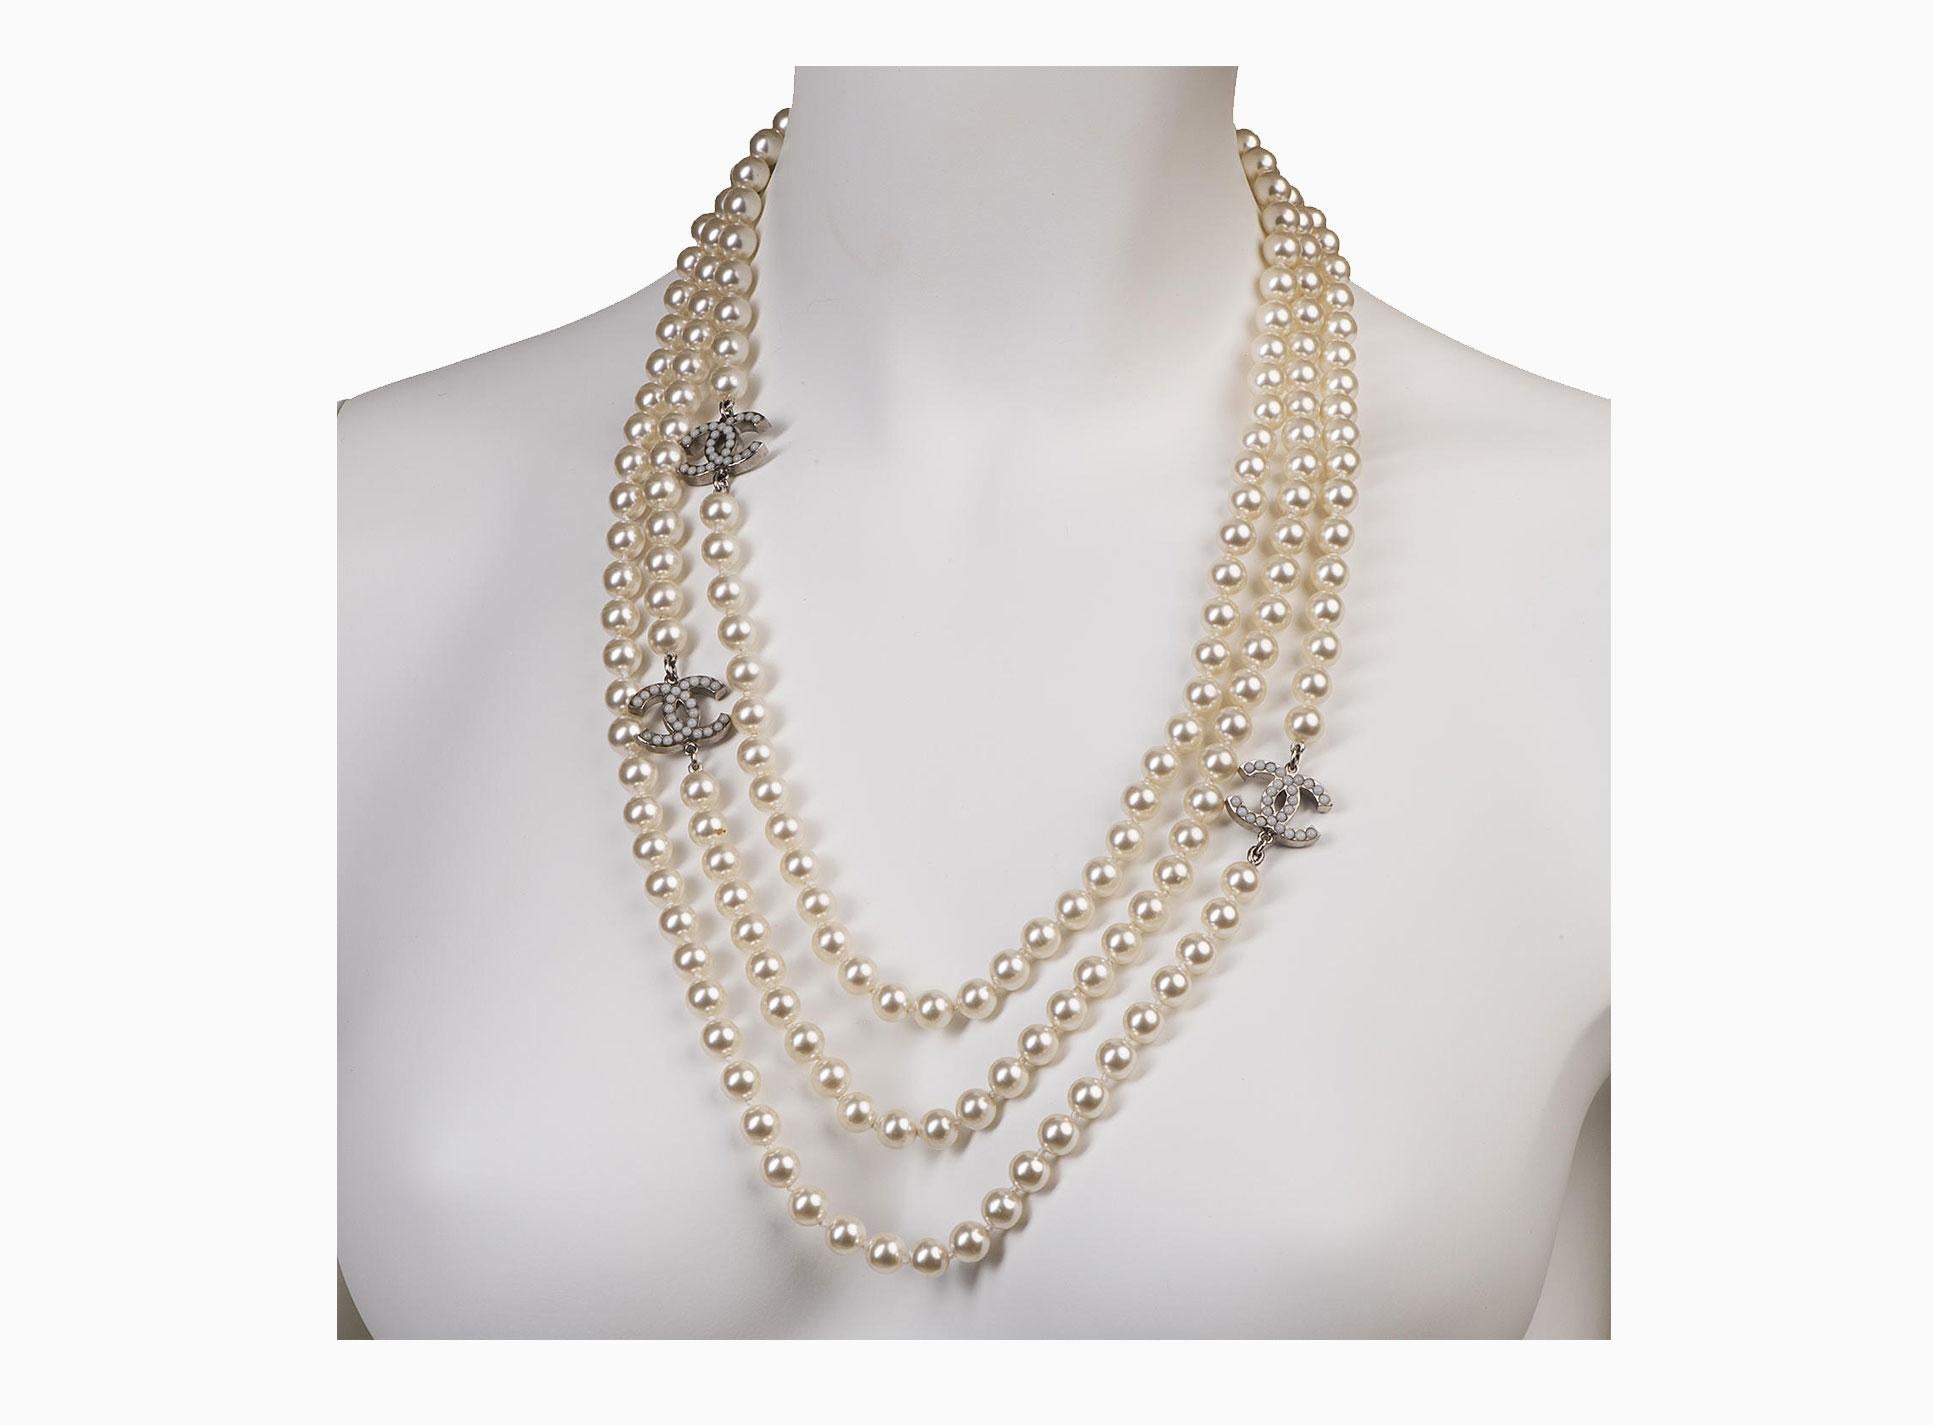 Pure Luxury !! This Chanel 3-String Necklace, decorated with three interlocking CC's, each inset with faux pearls in a white metal border. In absolutely pristine condition, this beautiful piece is 'Store-Fresh and comes with it's original gift box &